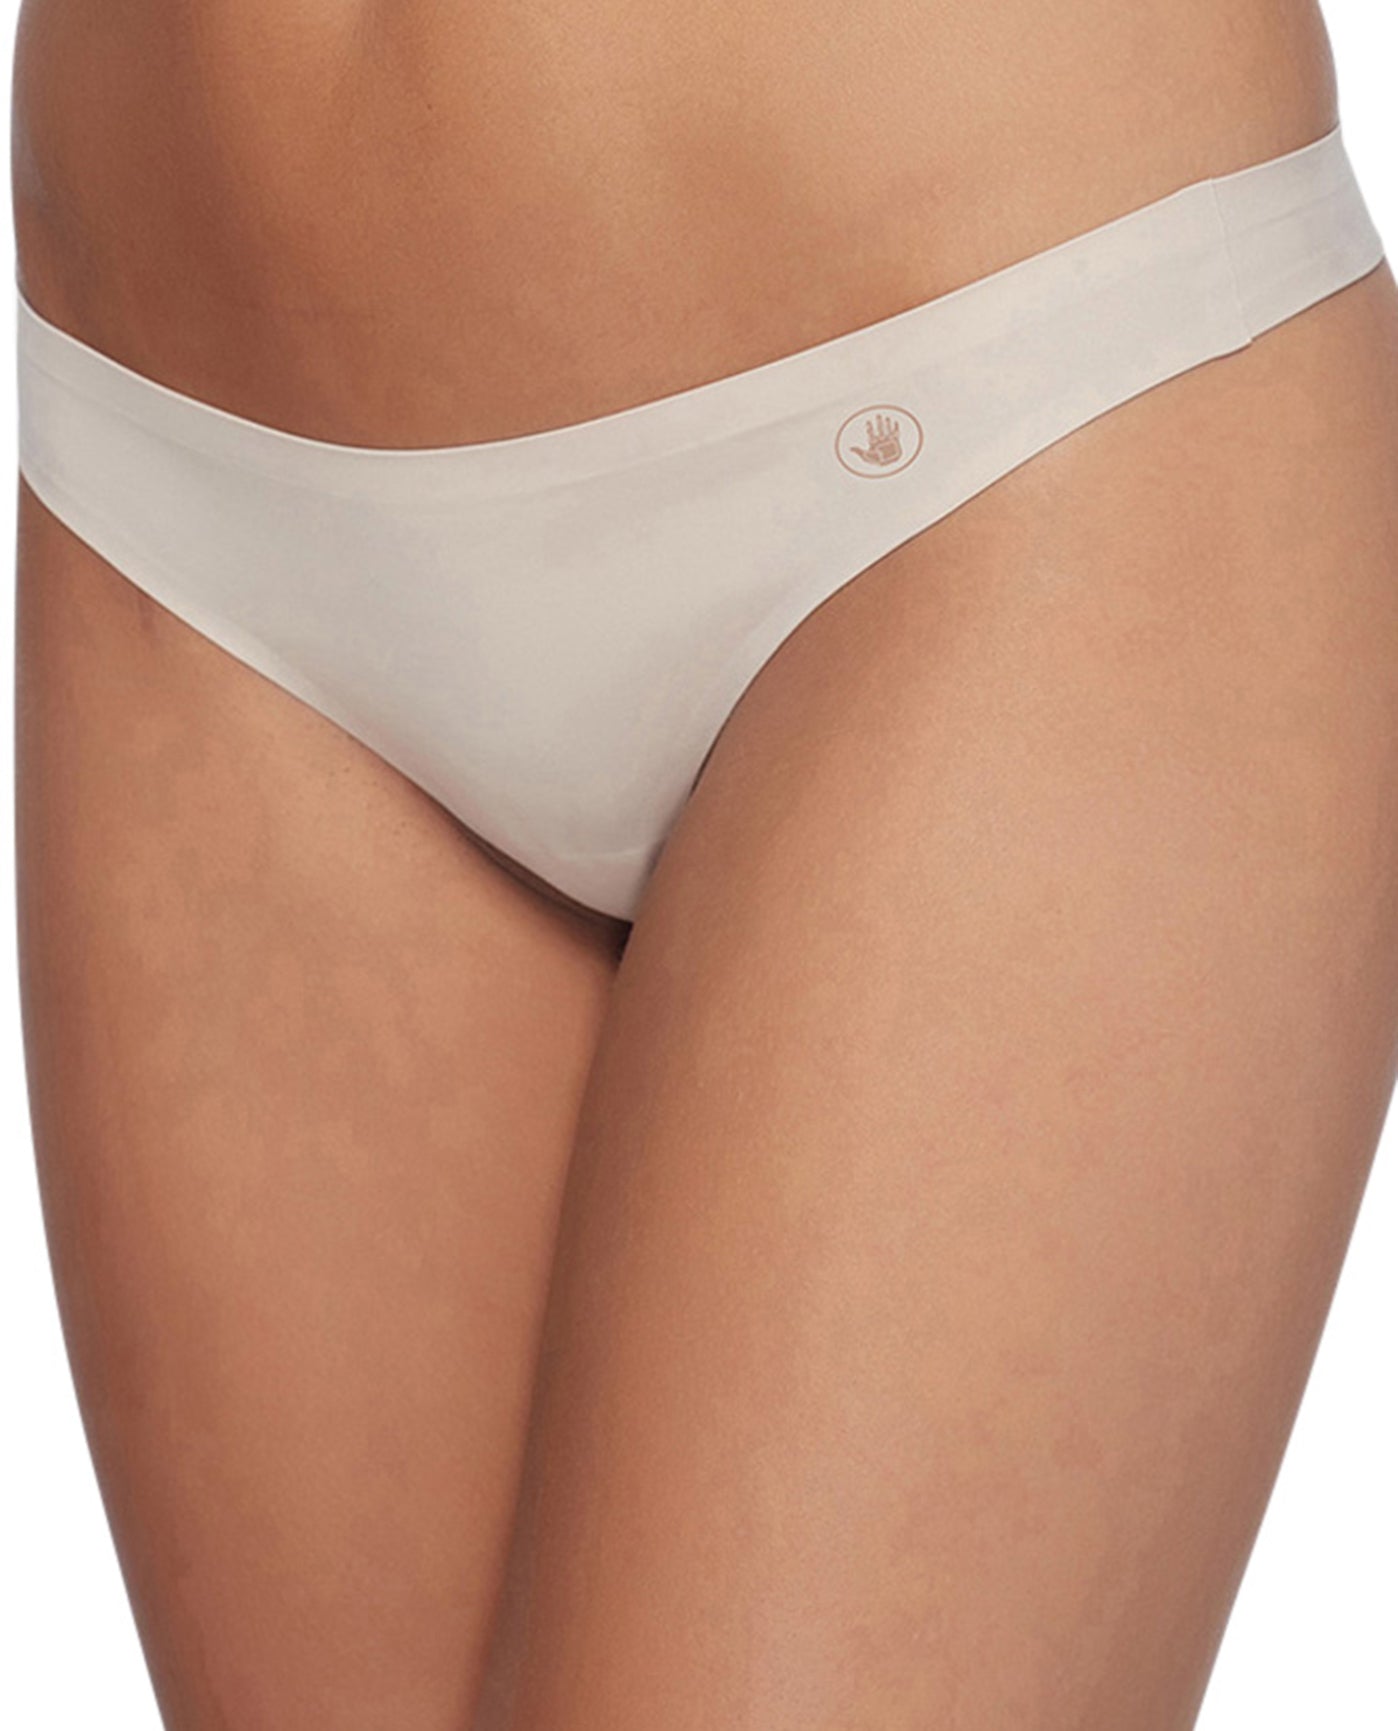 Back View Of Body Glove Sport Seamless Thong Panty | BGS Beige